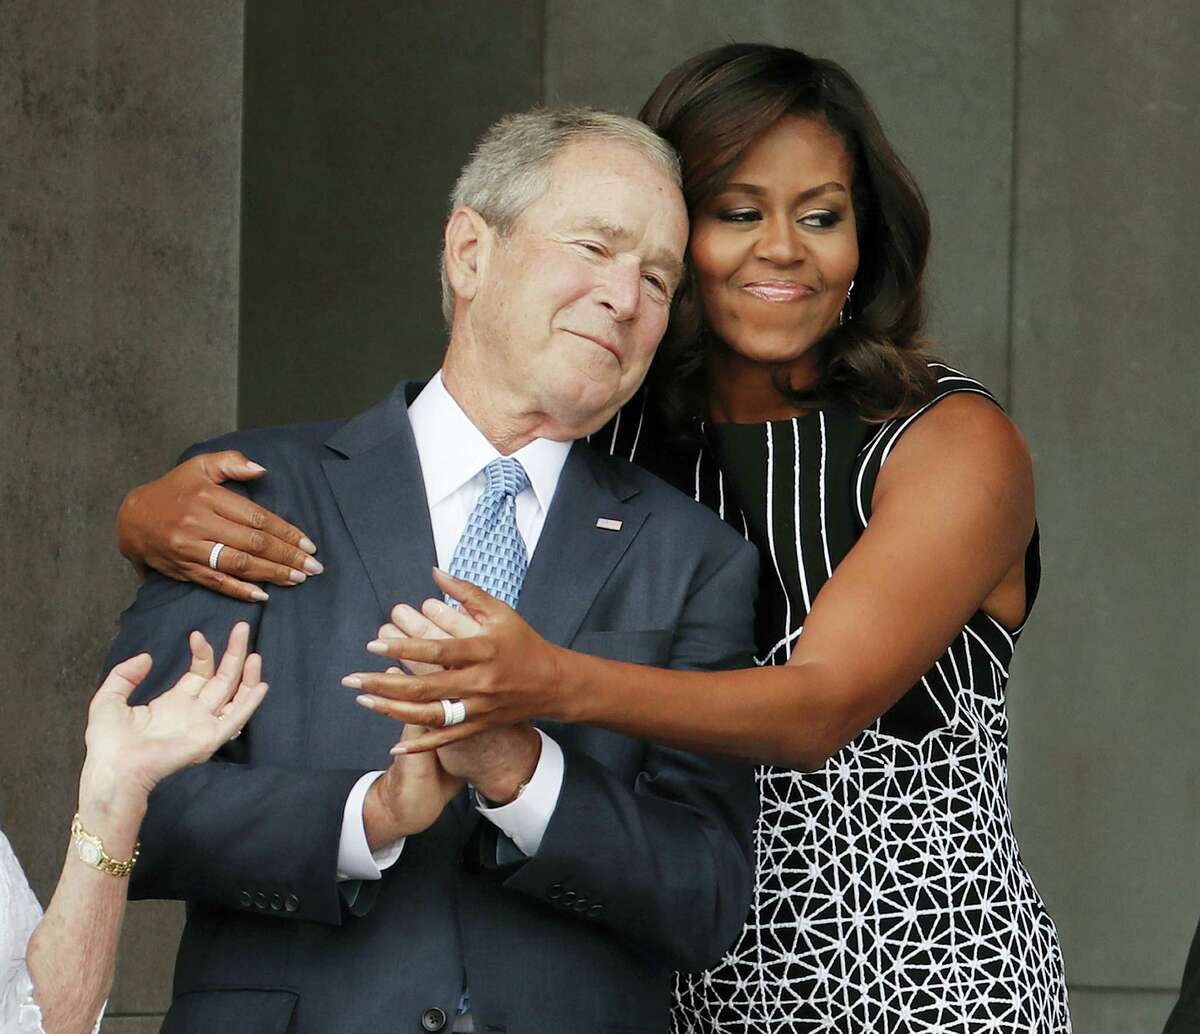 First lady Michelle Obama hugs former President George W. Bush during the dedication ceremony for the Smithsonian Museum of African American History and Culture on the National Mall in Washington, Saturday, Sept. 24, 2016.